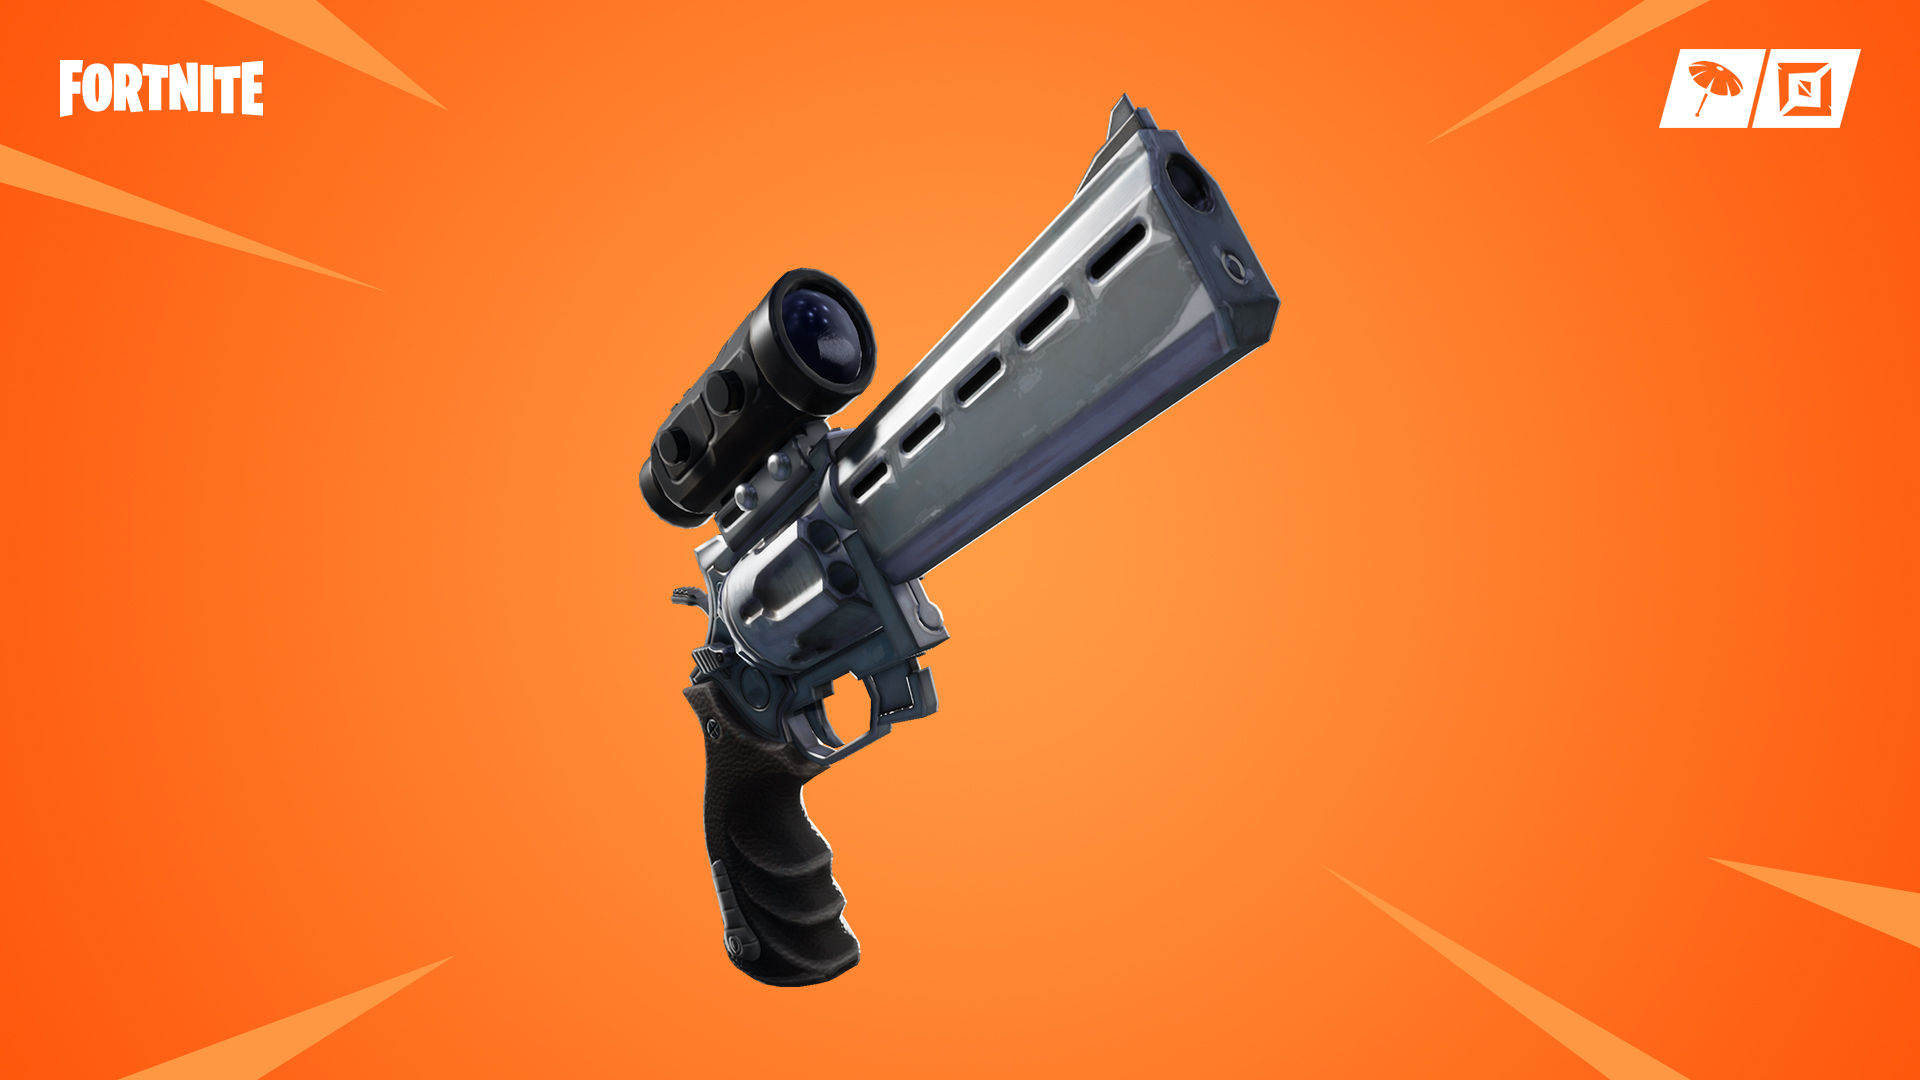 Fortnite 7.20 update with new weapons, items, game modes ... - 1920 x 1080 jpeg 105kB